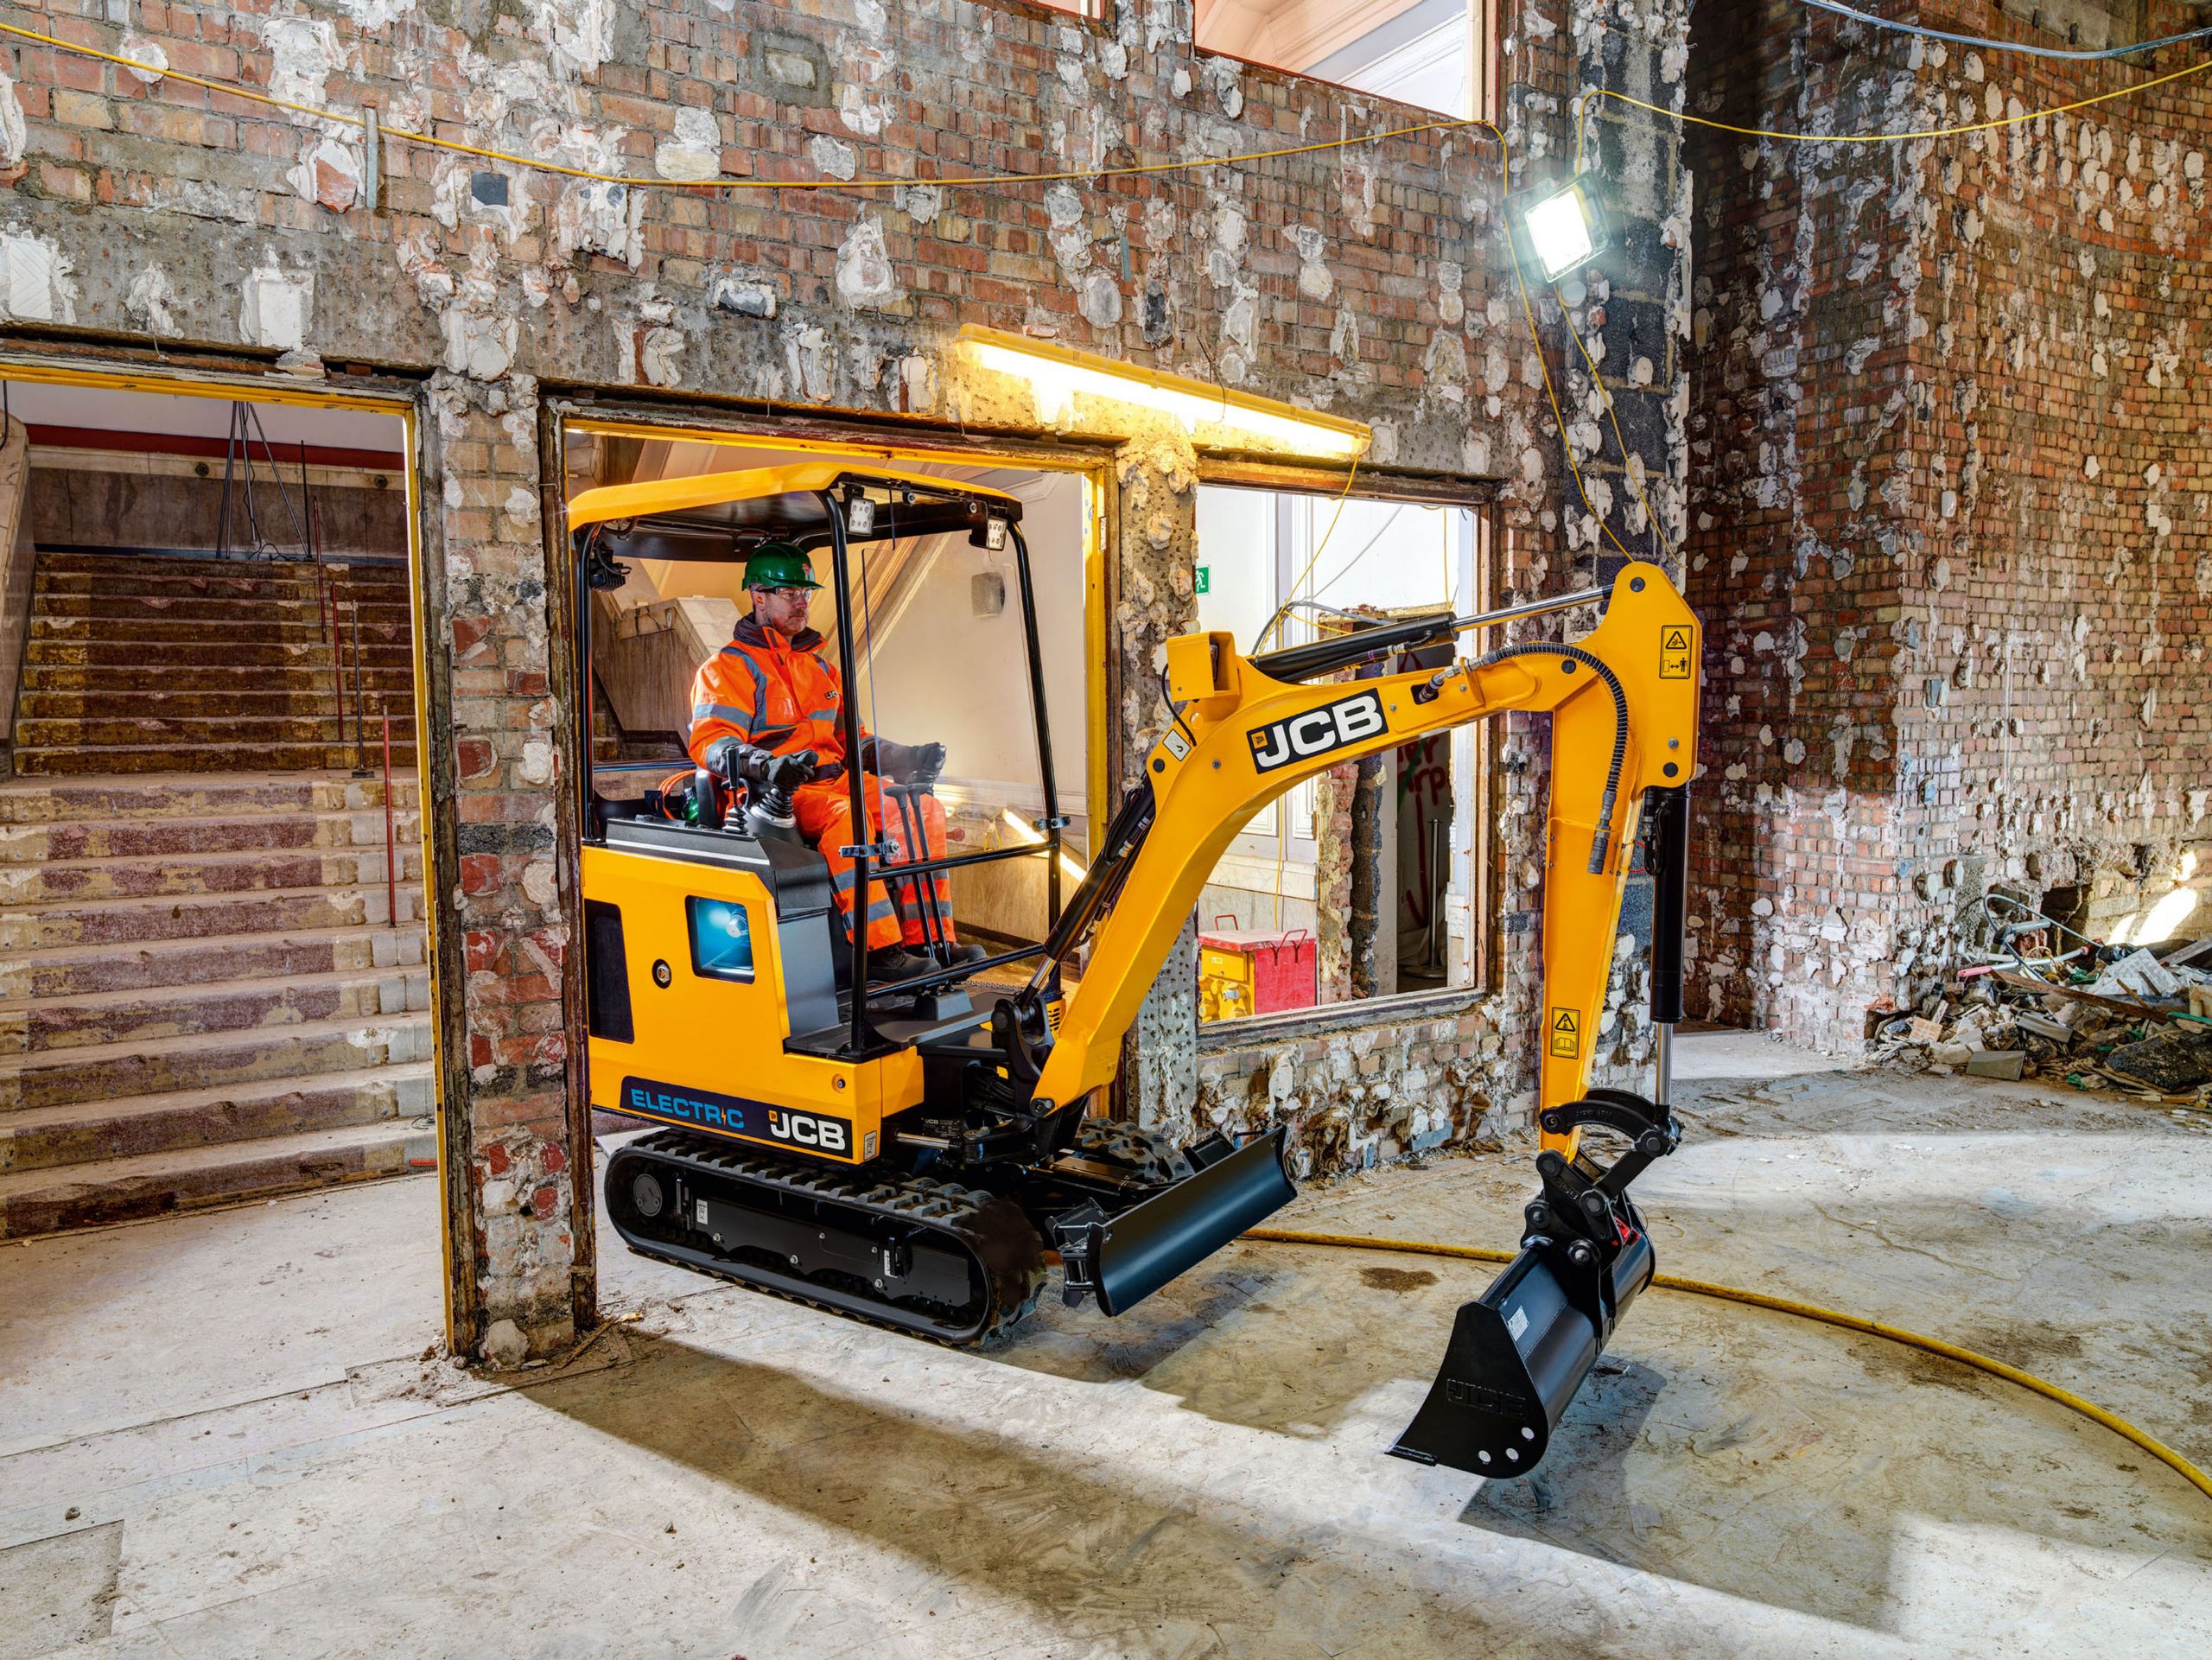 World’s first electric digger announced as one of three finalists for most prestigious UK engineering award @RAEngNews